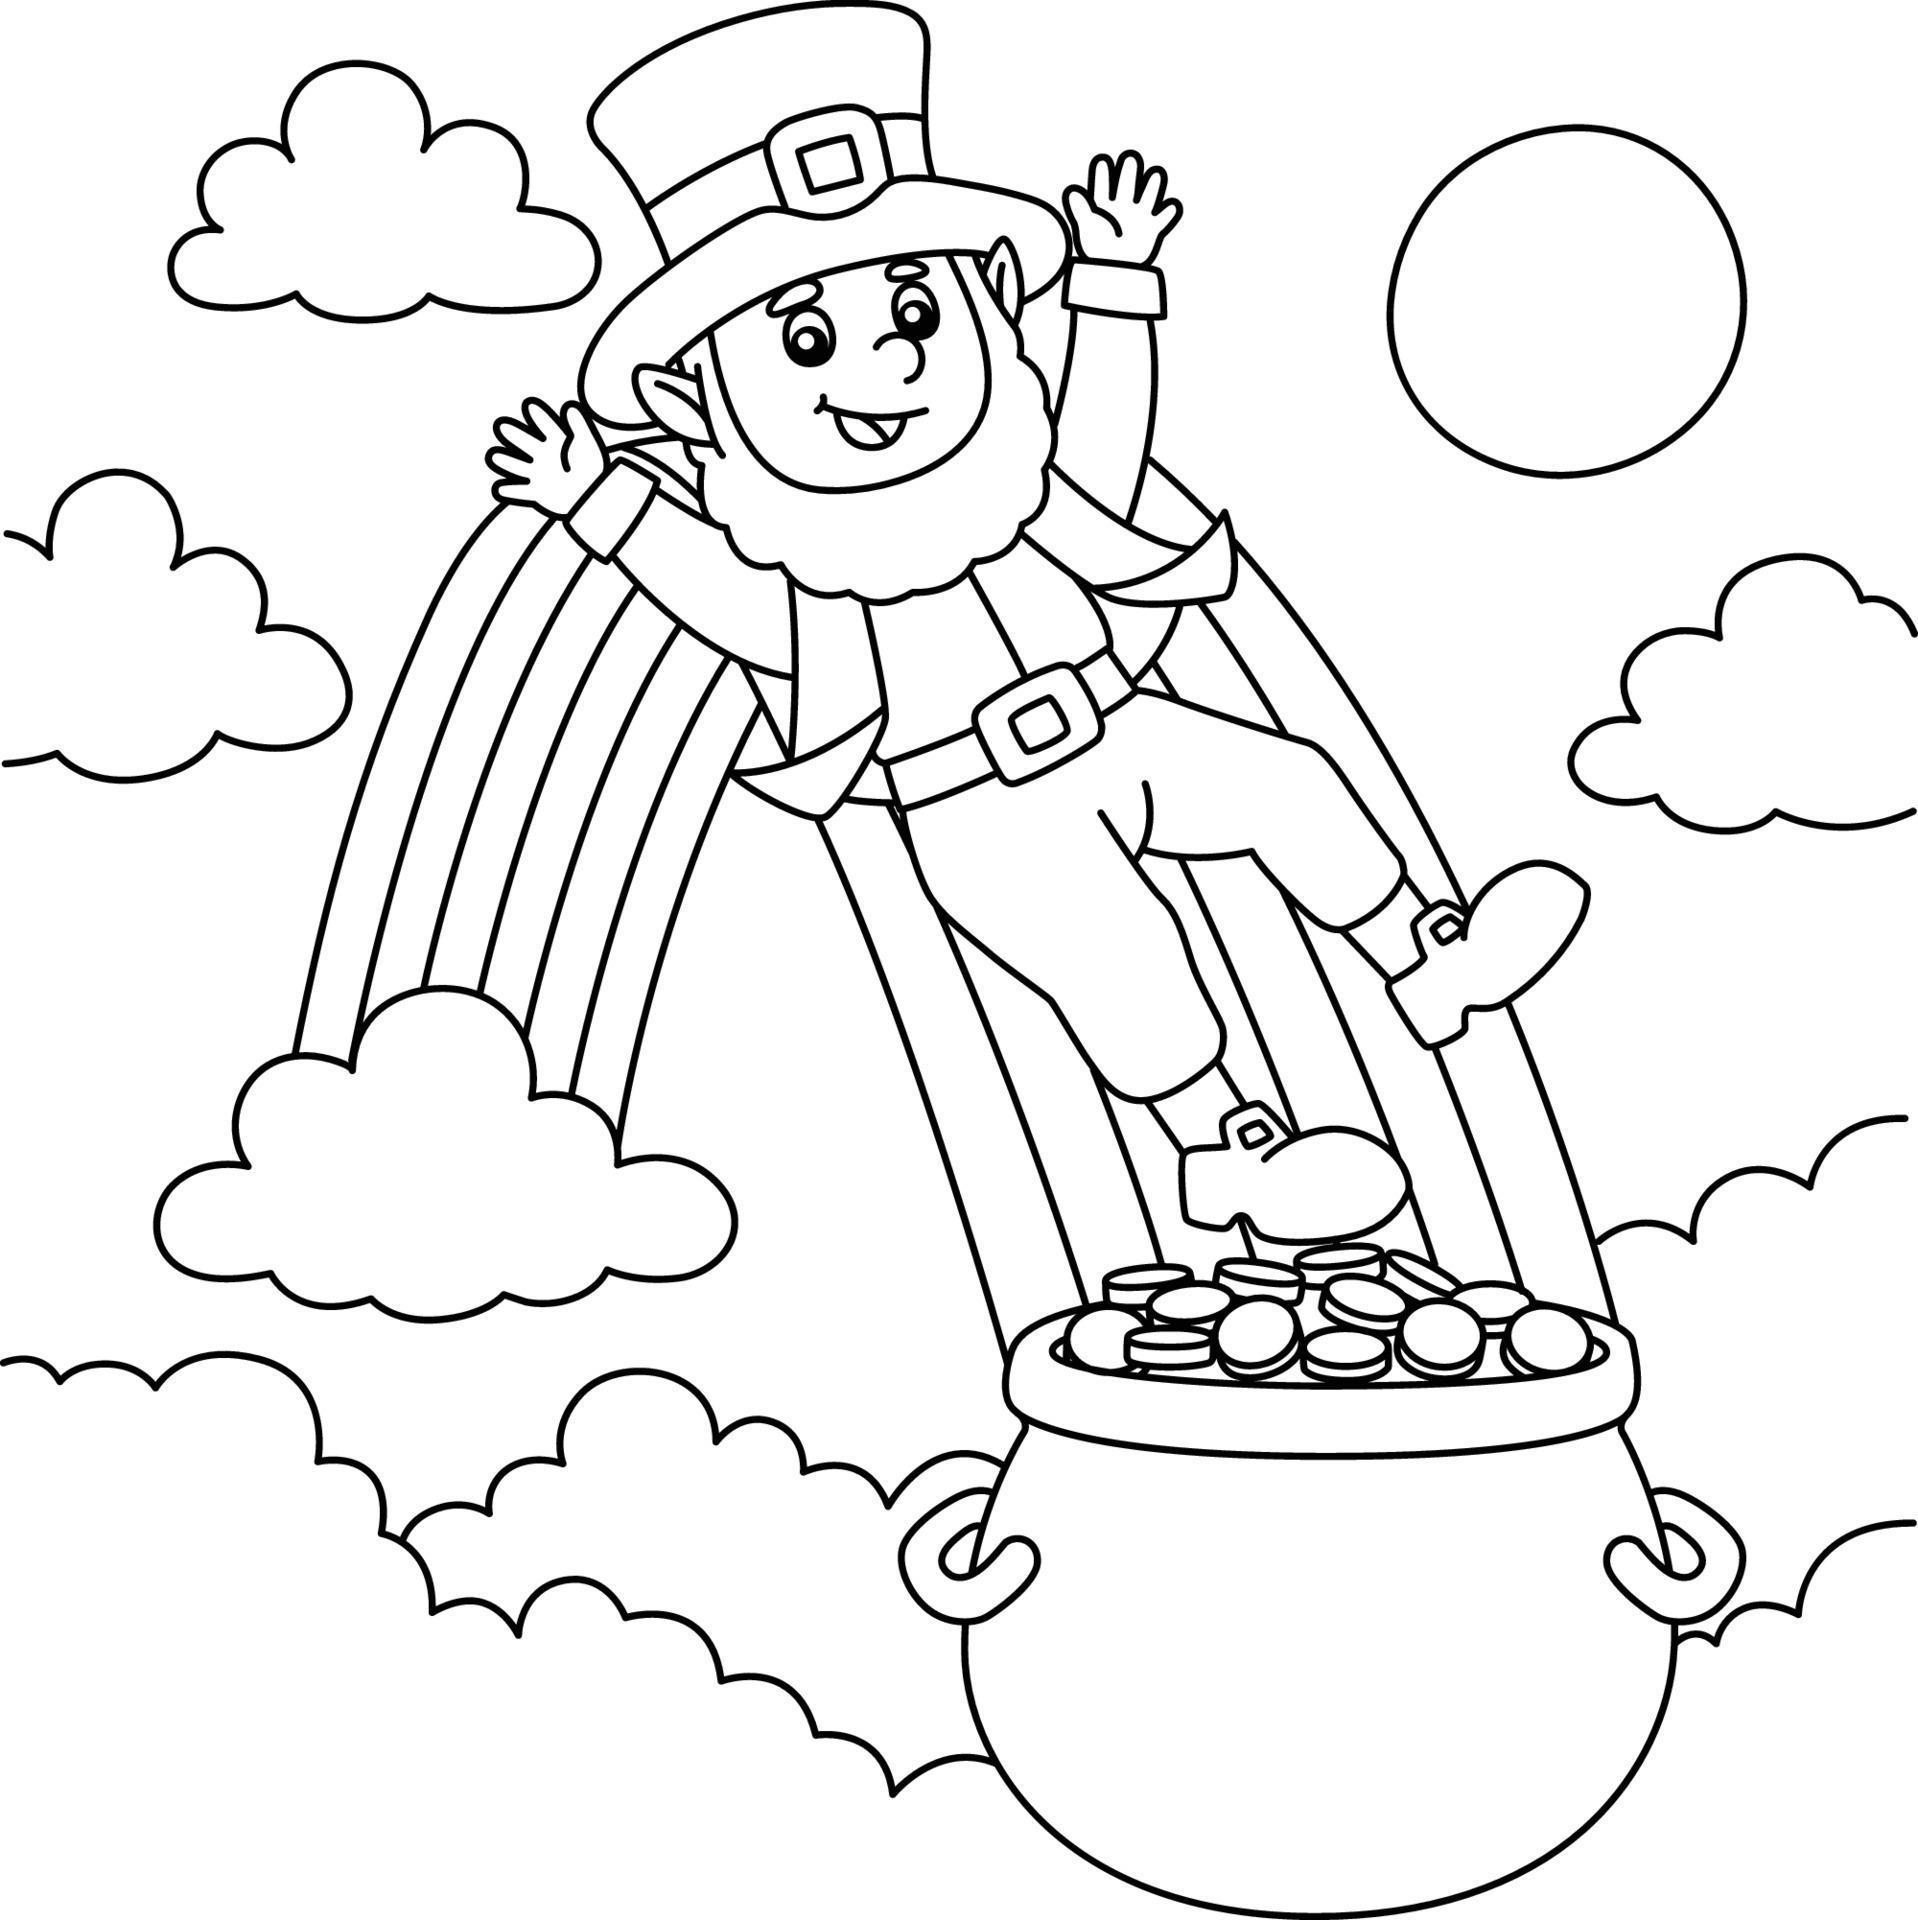 St. Patricks Day Leprechaun Slides on a Rsainbow Coloring Page for ...